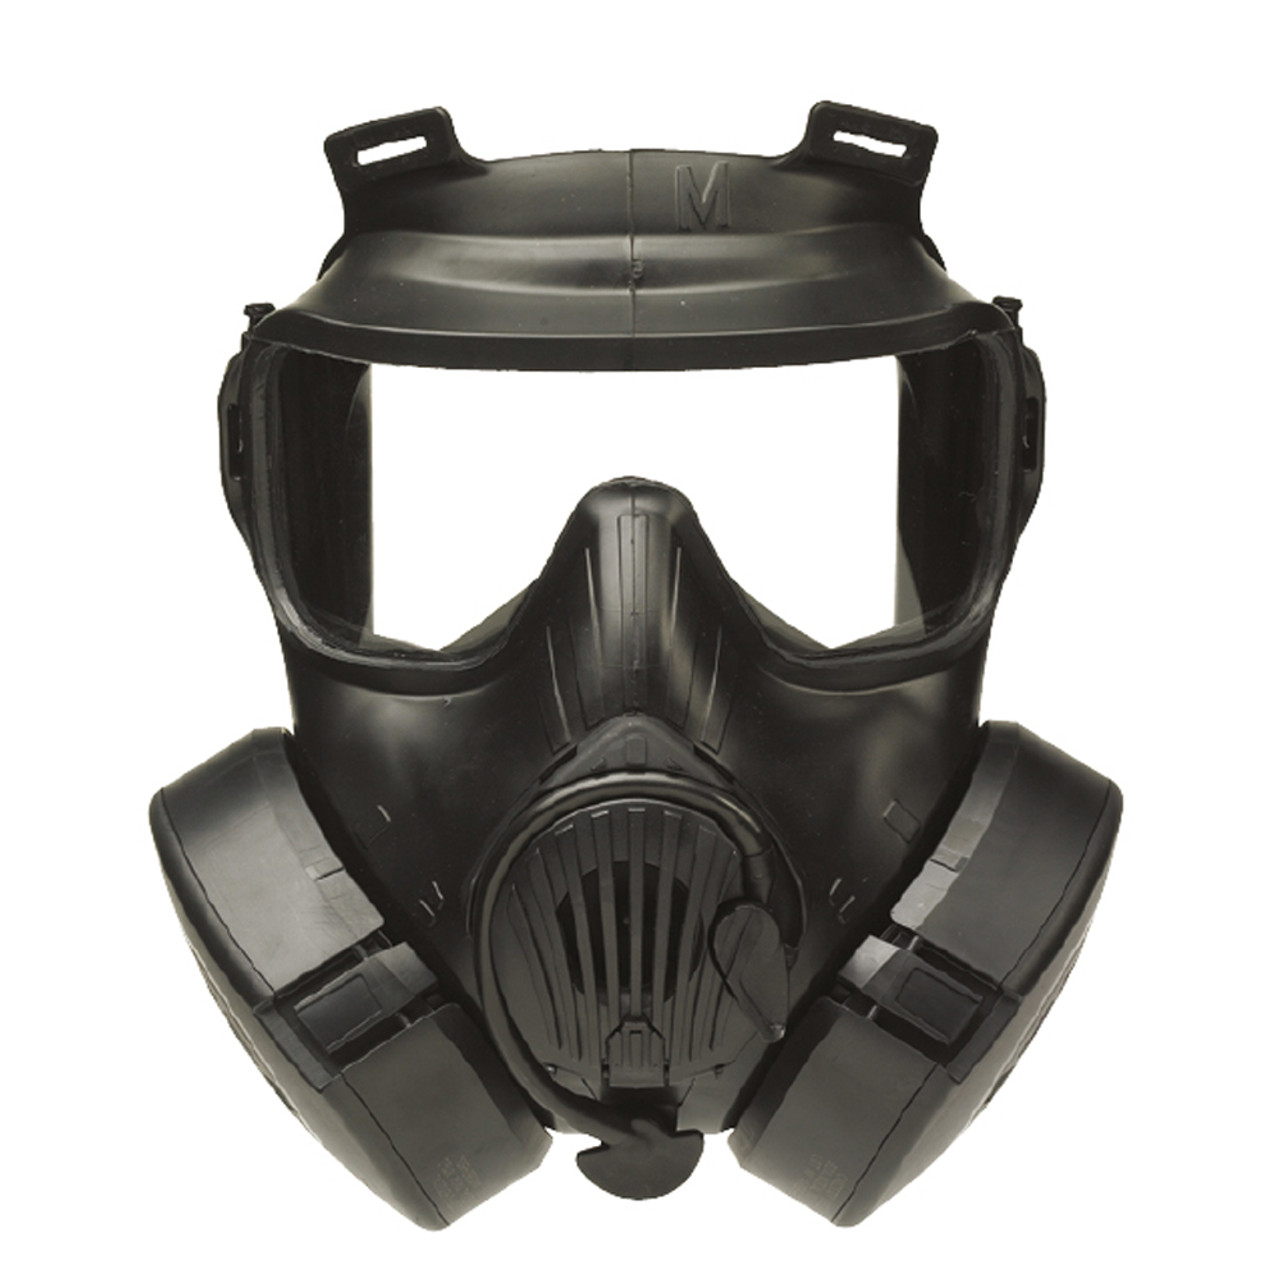 Avon Protection FM50 (APR) Air Purifying Respirator 71400, CBRN full face mask, specifically designed to meet the latest NATO forces and military mask requirements